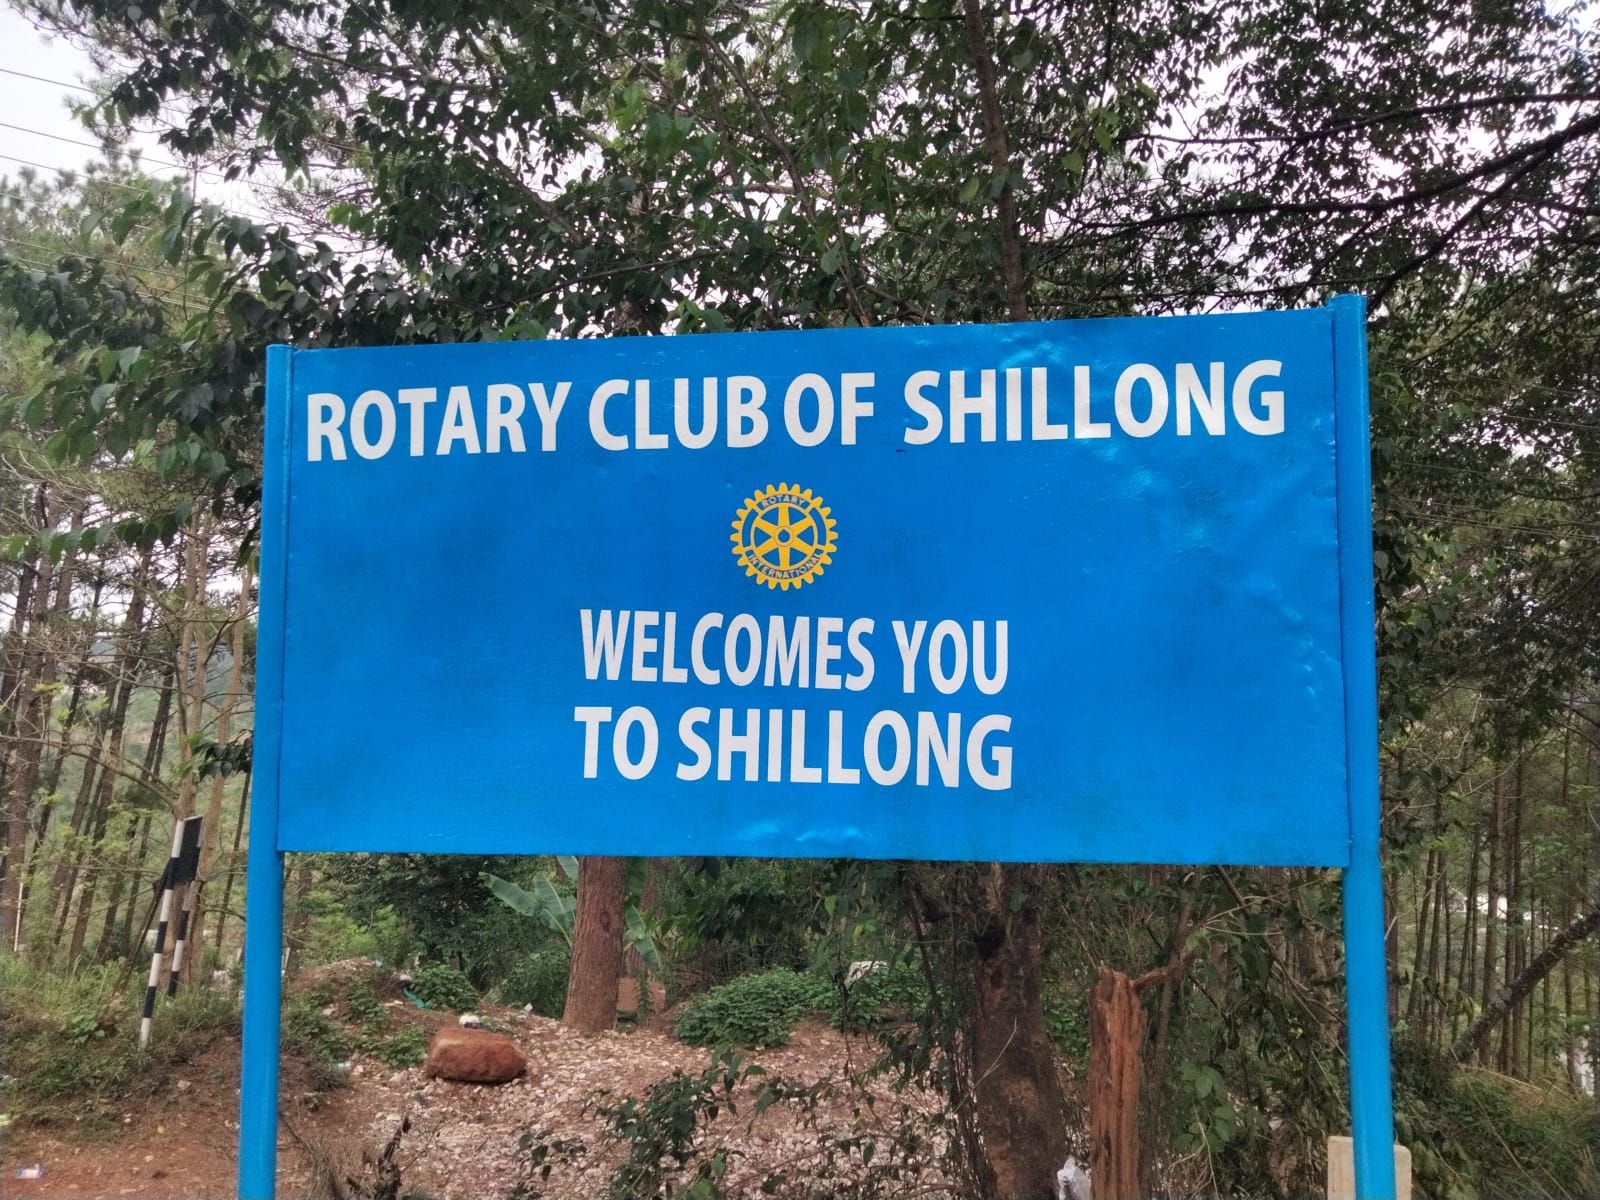 Branding of Rotary club of Shillong ( Signage on National Highway)